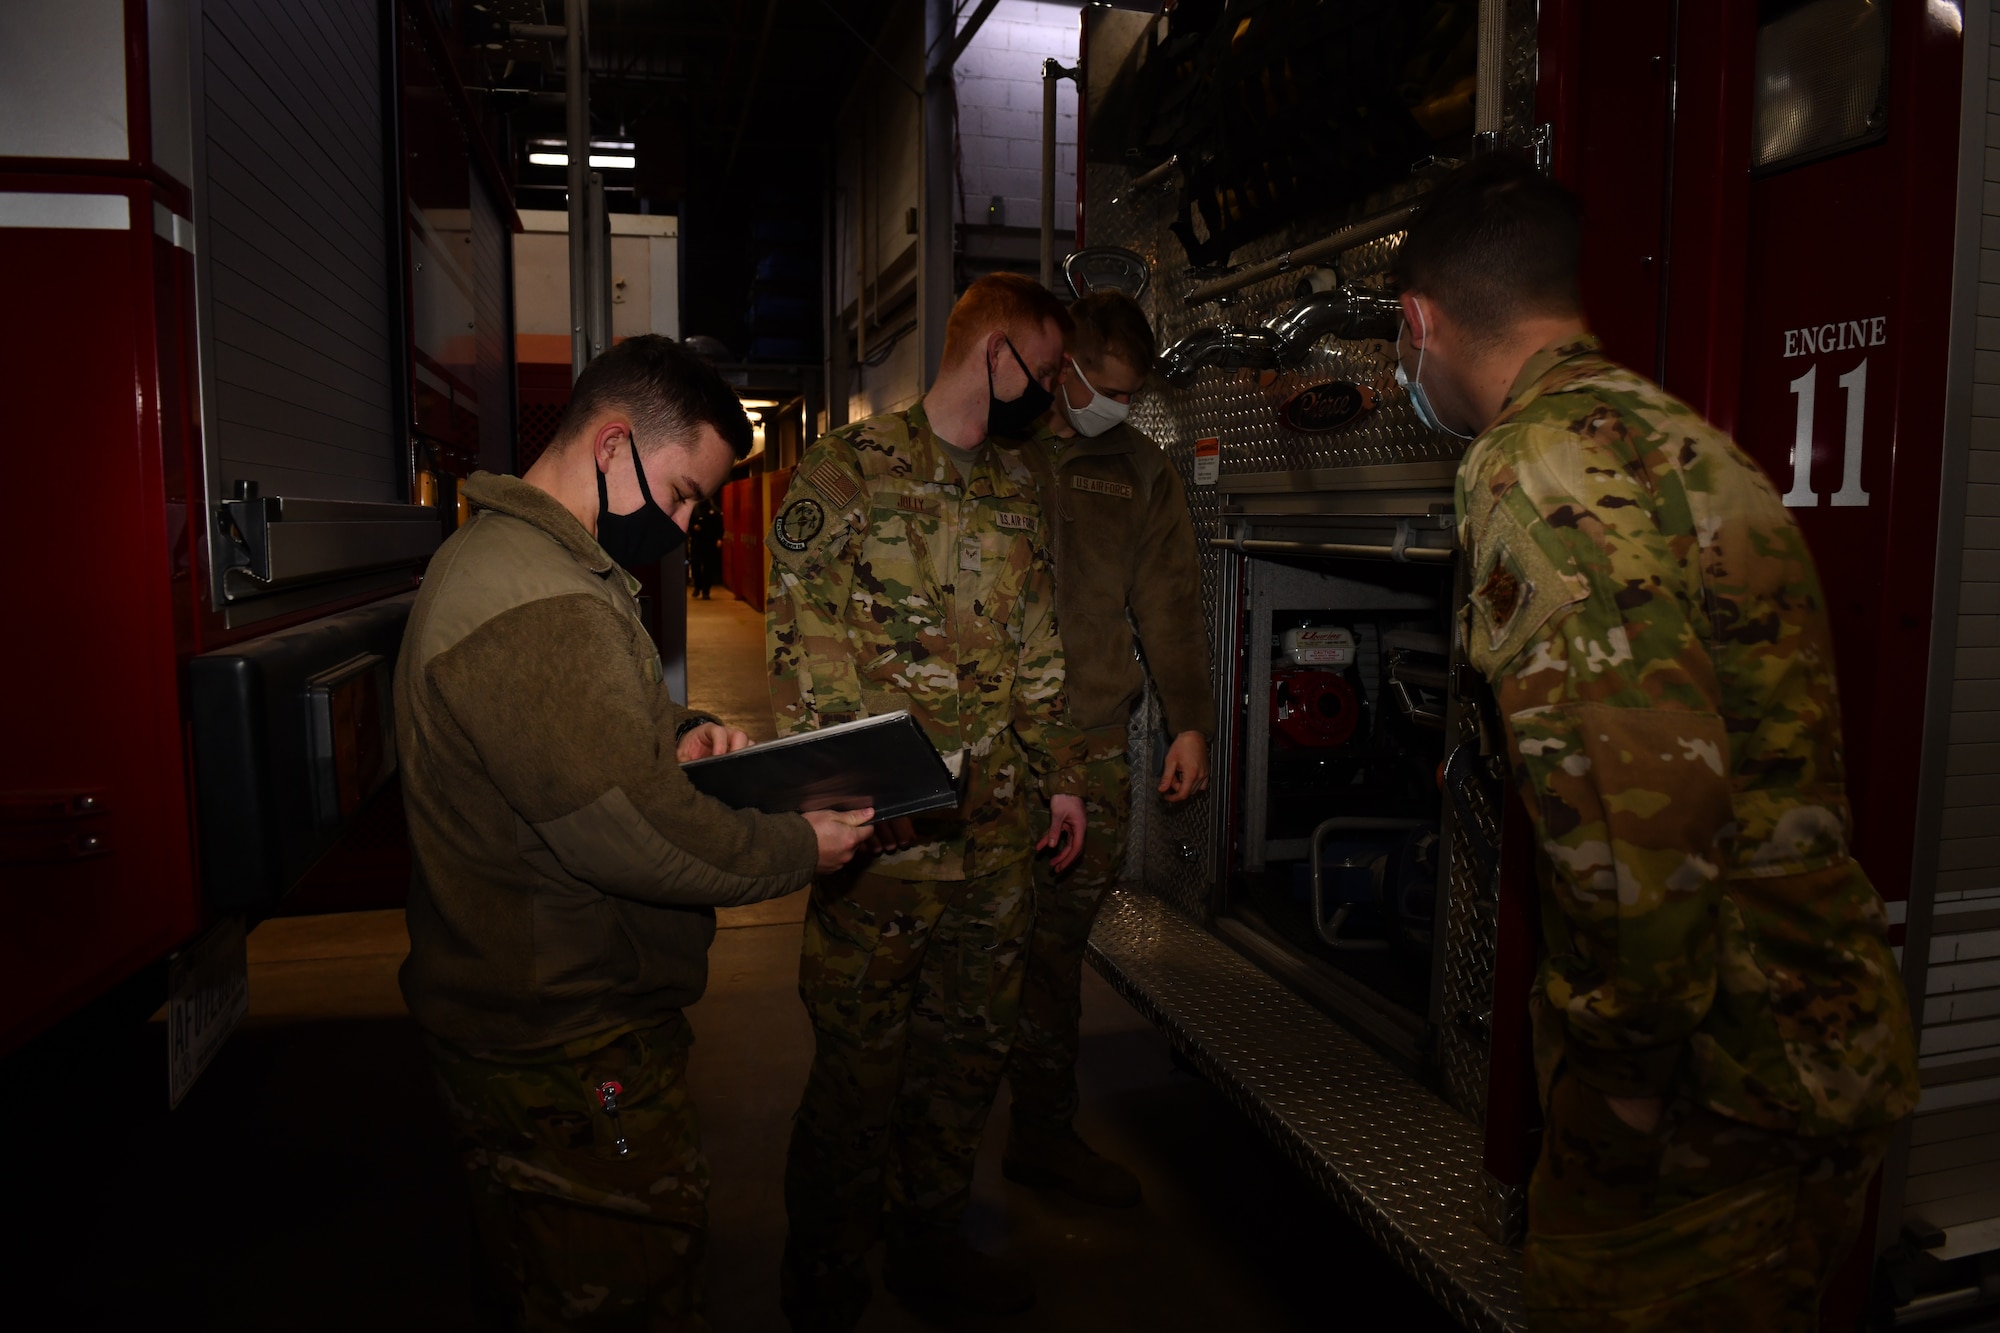 Airmen from the 97th Civil Engineer Squadron Fire and Emergency Services Flight, perform an apparatus check at Altus Air Force Base, Oklahoma, Jan. 17, 2022. The Airmen perform routine checks on the apparatus, or fire truck, to ensure that the equipment is functional and ready for any emergency. (U.S. Air Force photo by Airman 1st Class Miyah Gray)